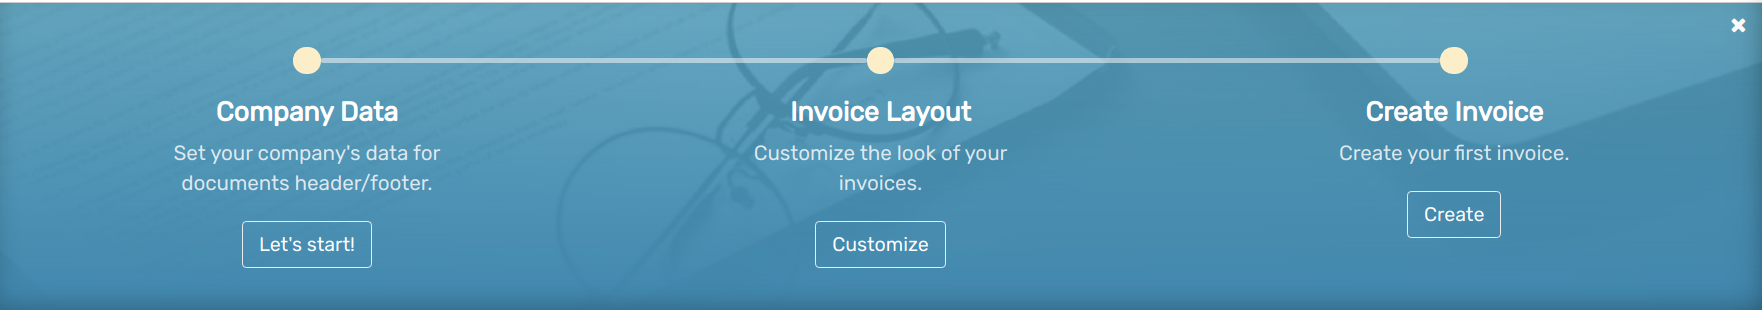 Step-by-step onboarding banner in Flectra Invoicing